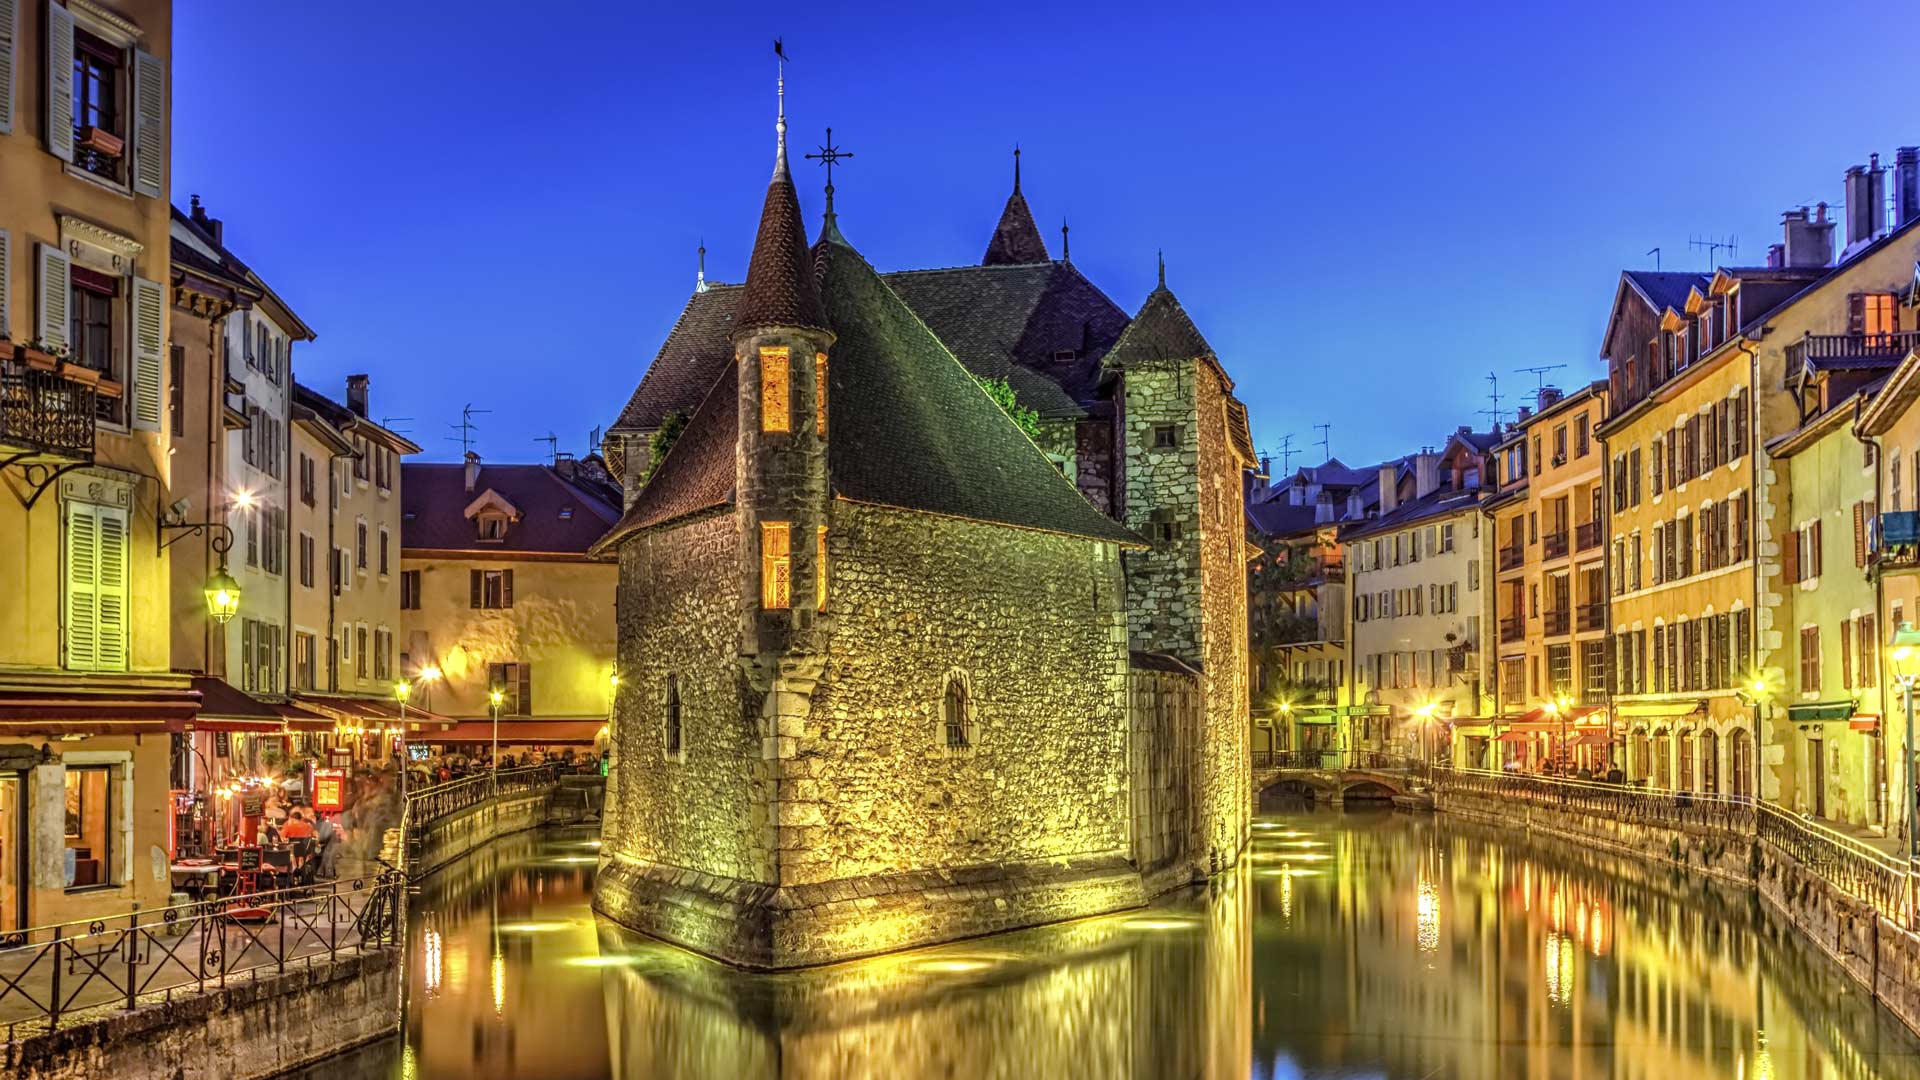 Palais de l'Ile jail and canal in Annecy old city, France, HDR ...